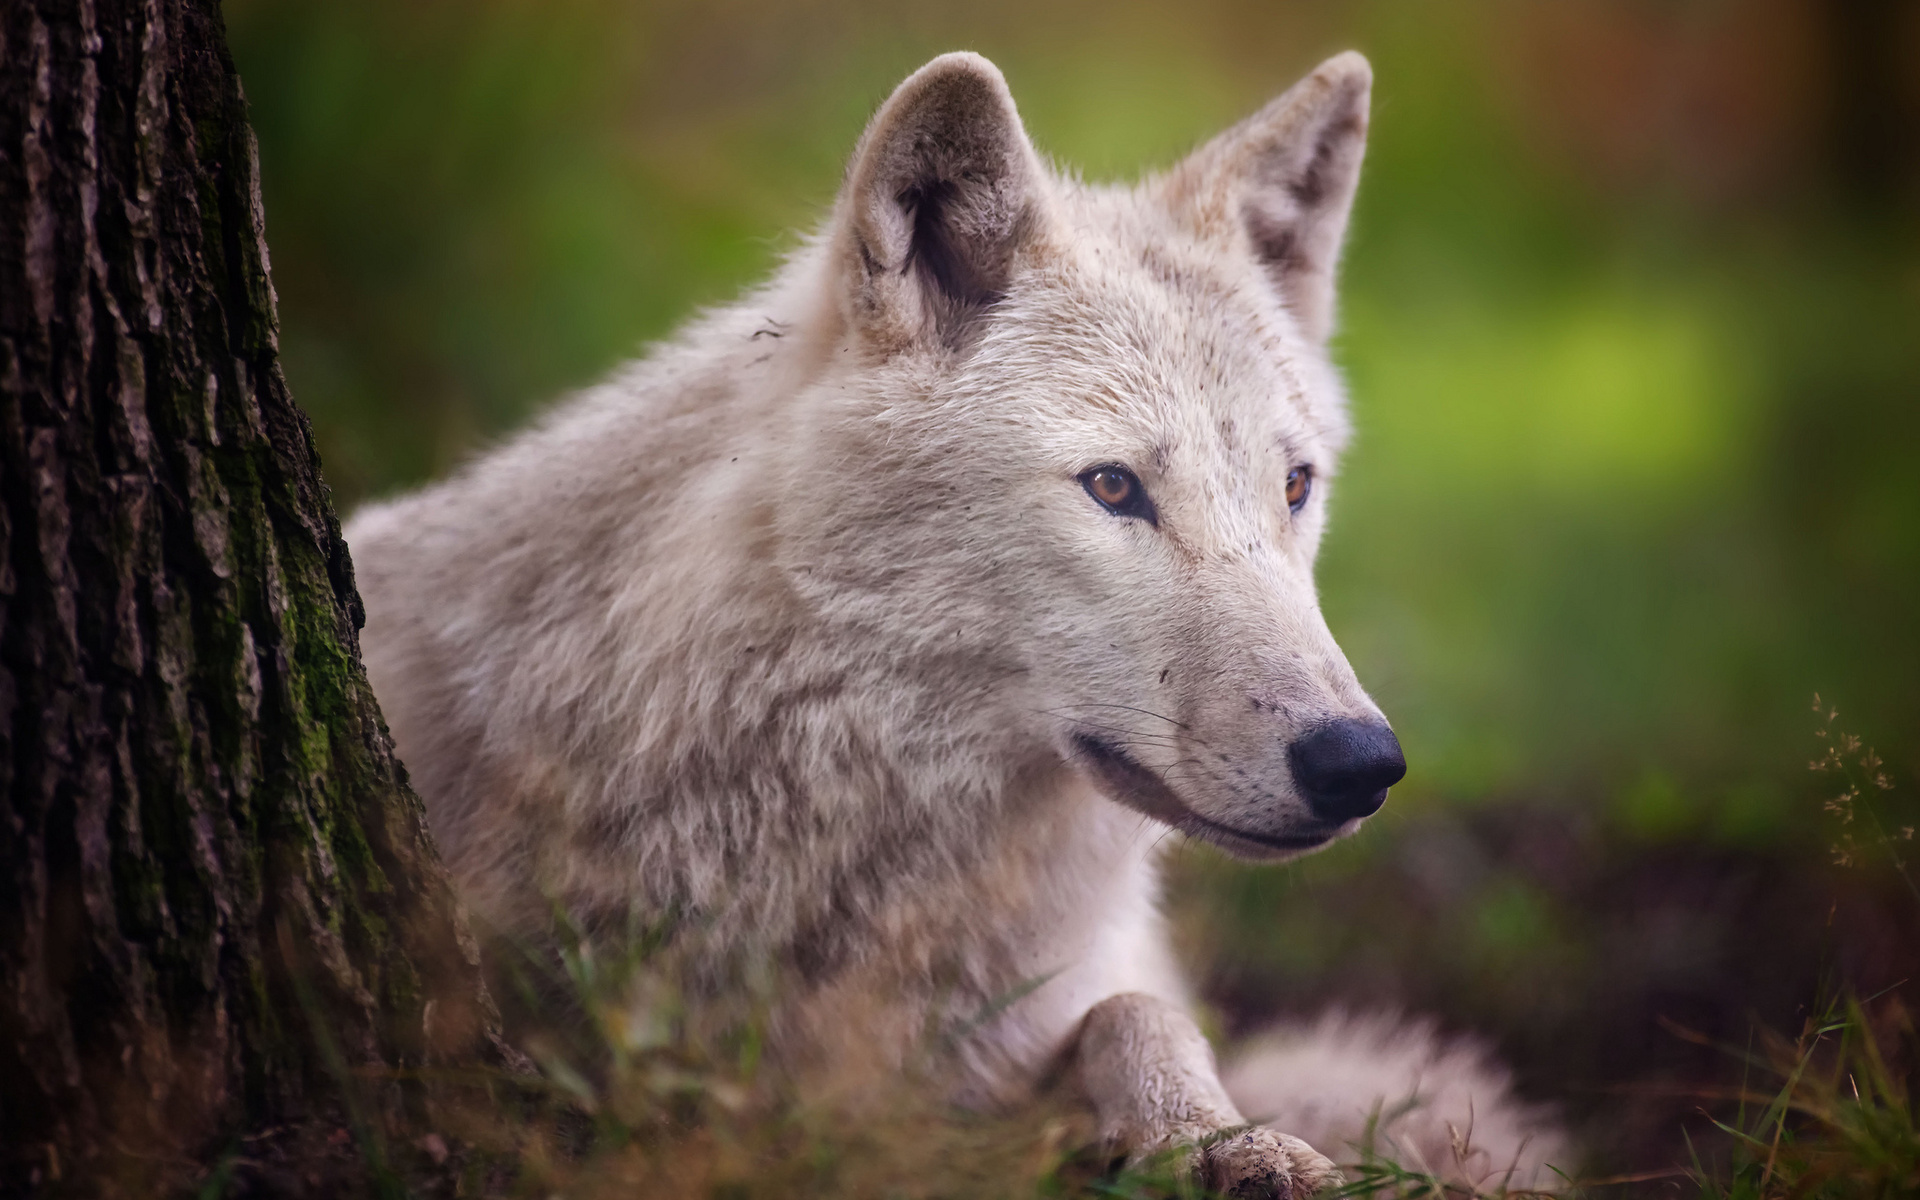 animals, Wolf, Wolves, Wildlife, Nature, Predator, Fur, Eyes, Face, Stare, Look, Trees, Forests, Landscapes Wallpaper